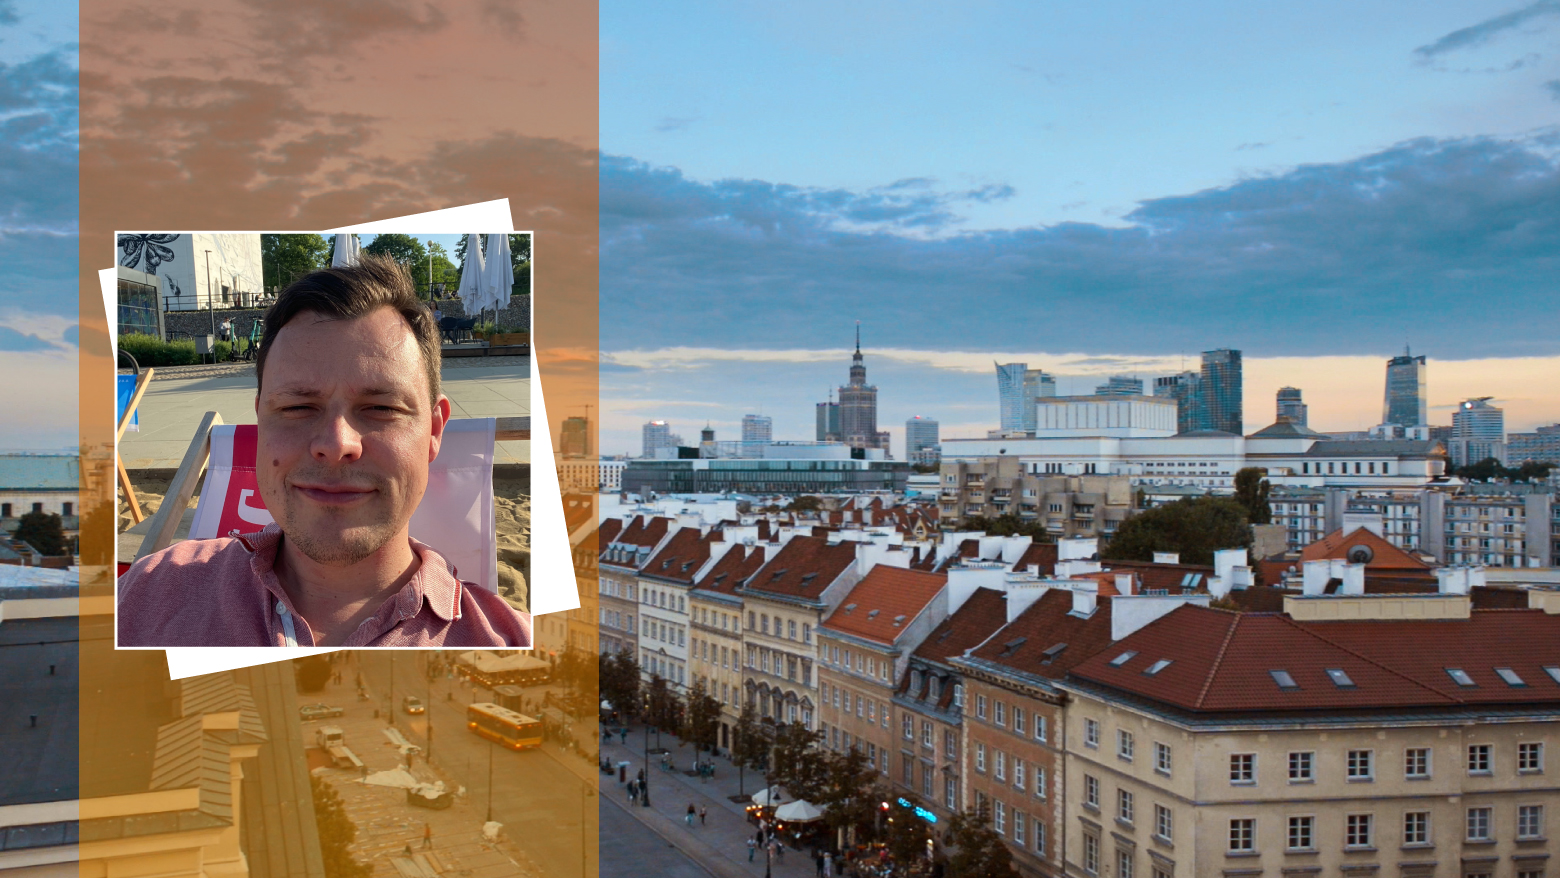 I fell in love with Warsaw – Jelco from PwC on his move to Poland